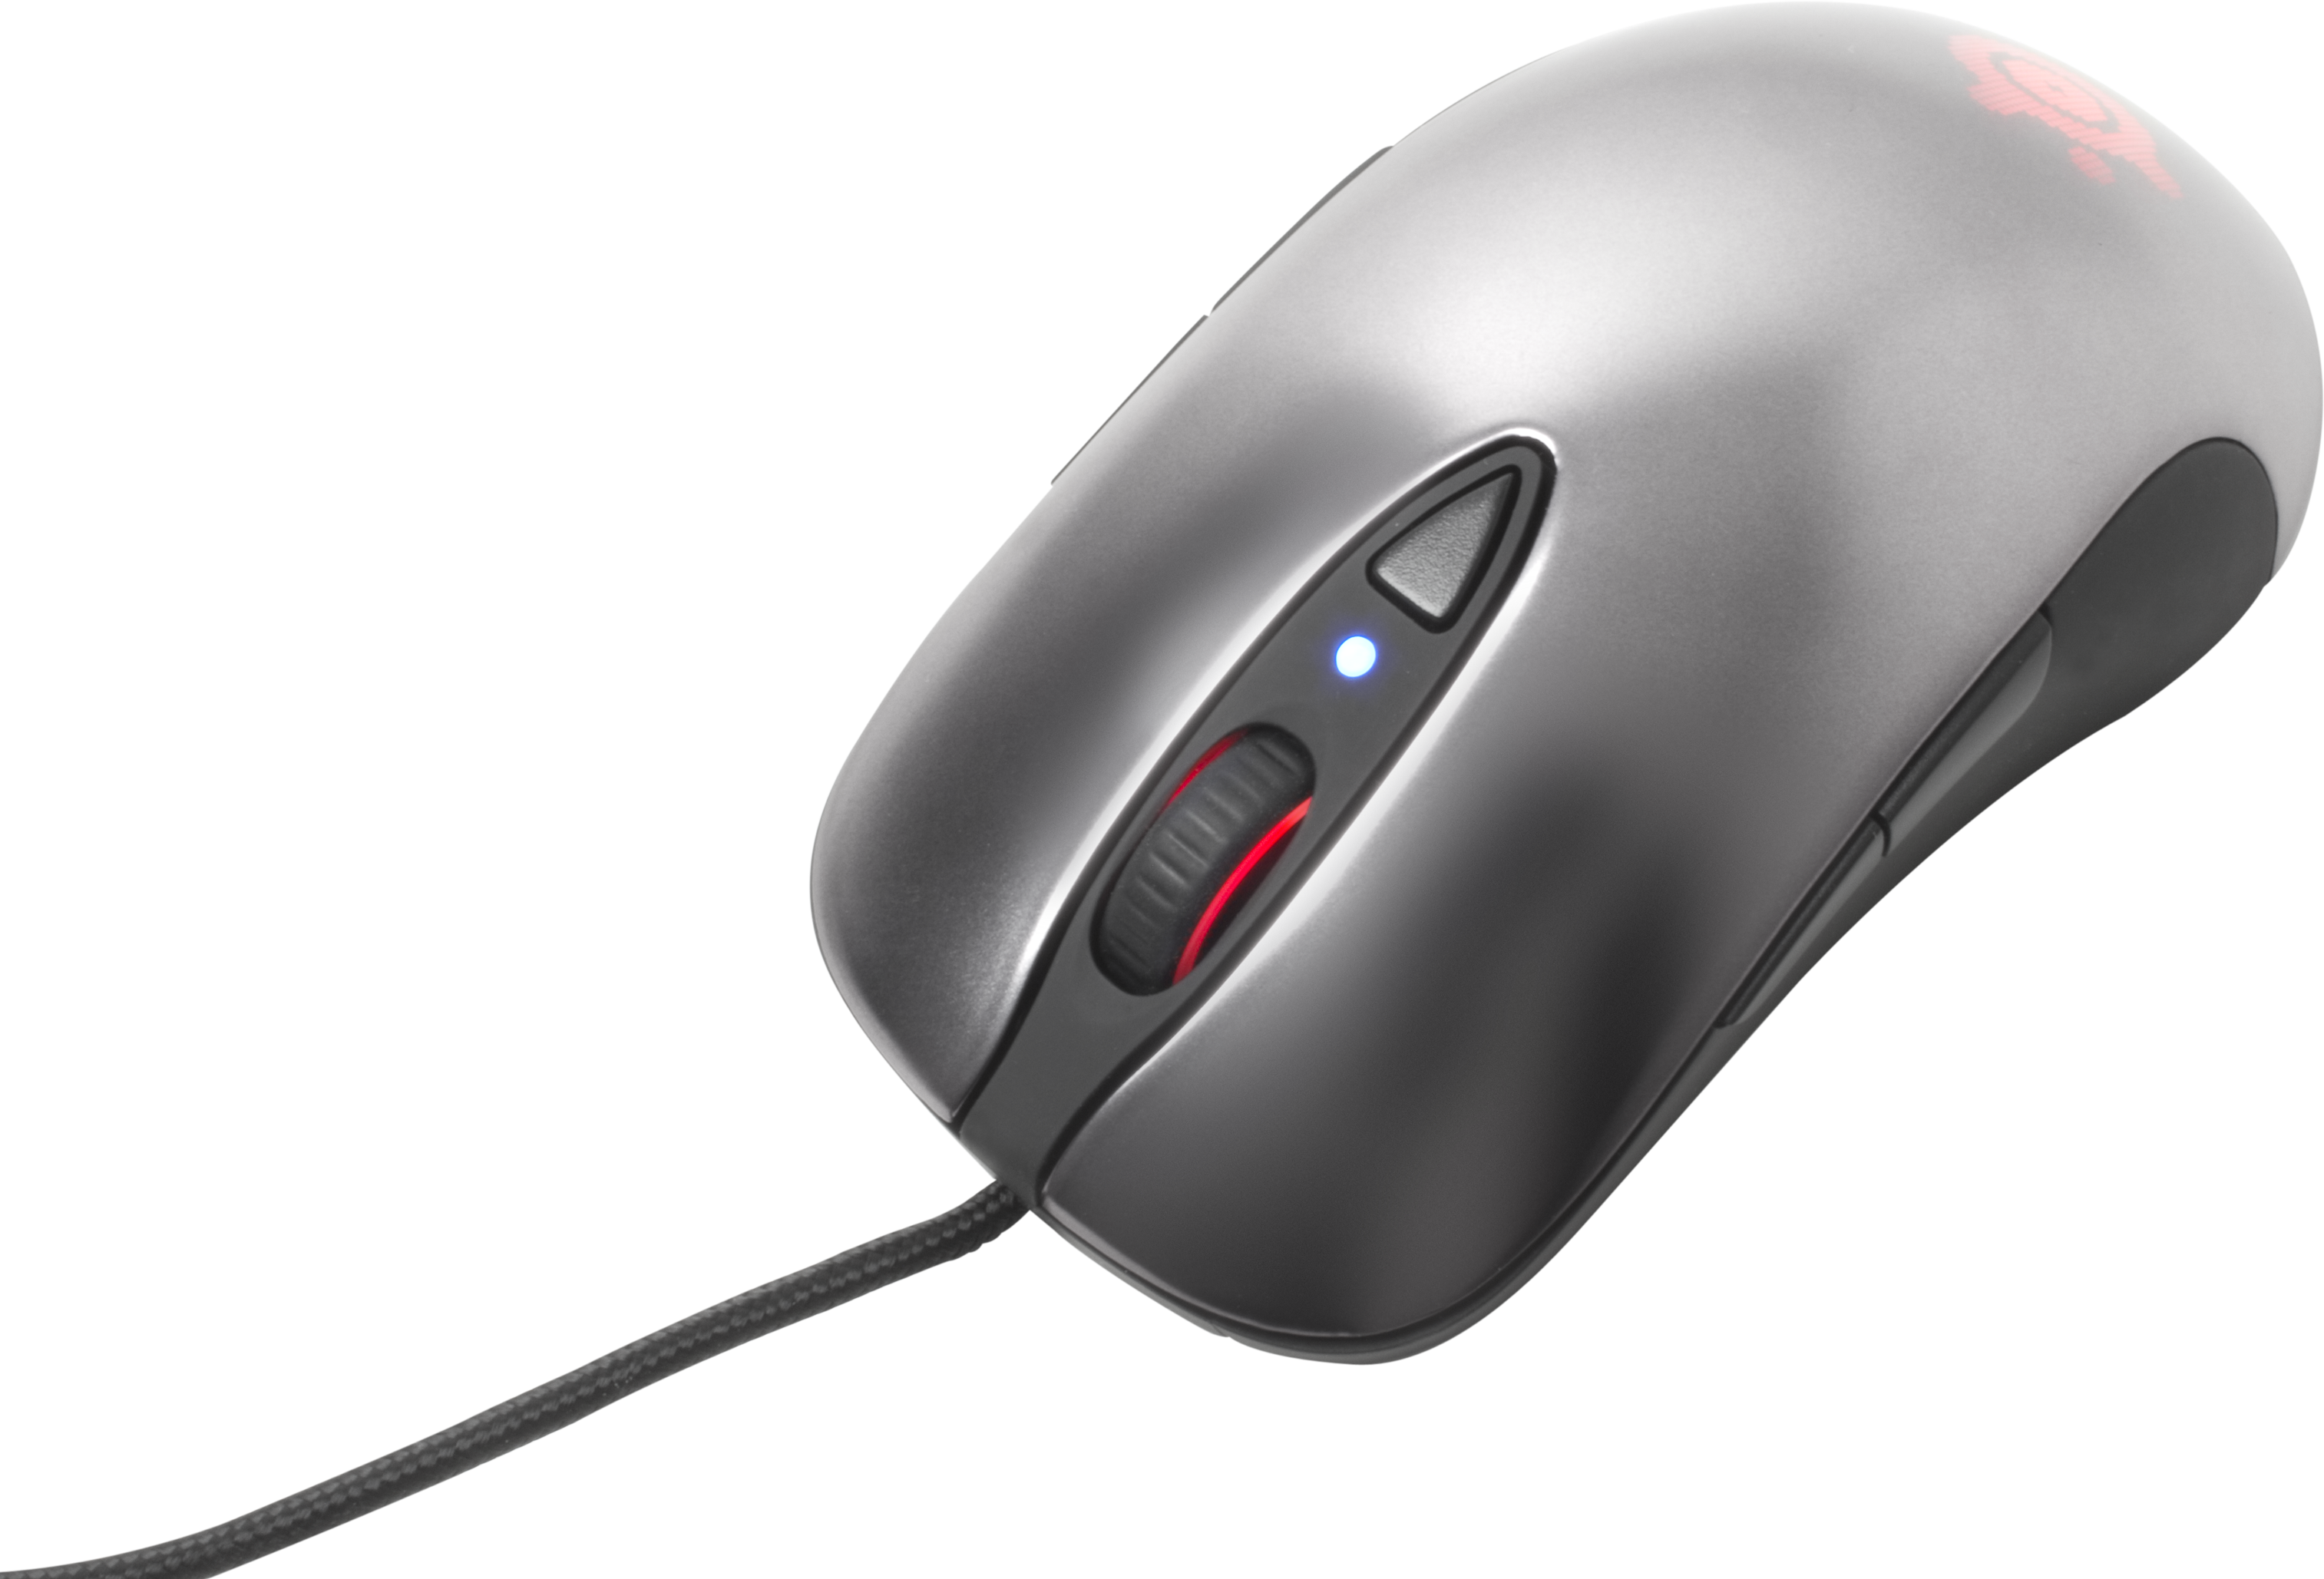 Pc Mouse Png Image - Steelseries Sensei Laser Gaming Mouse (grey) (3027x2057)